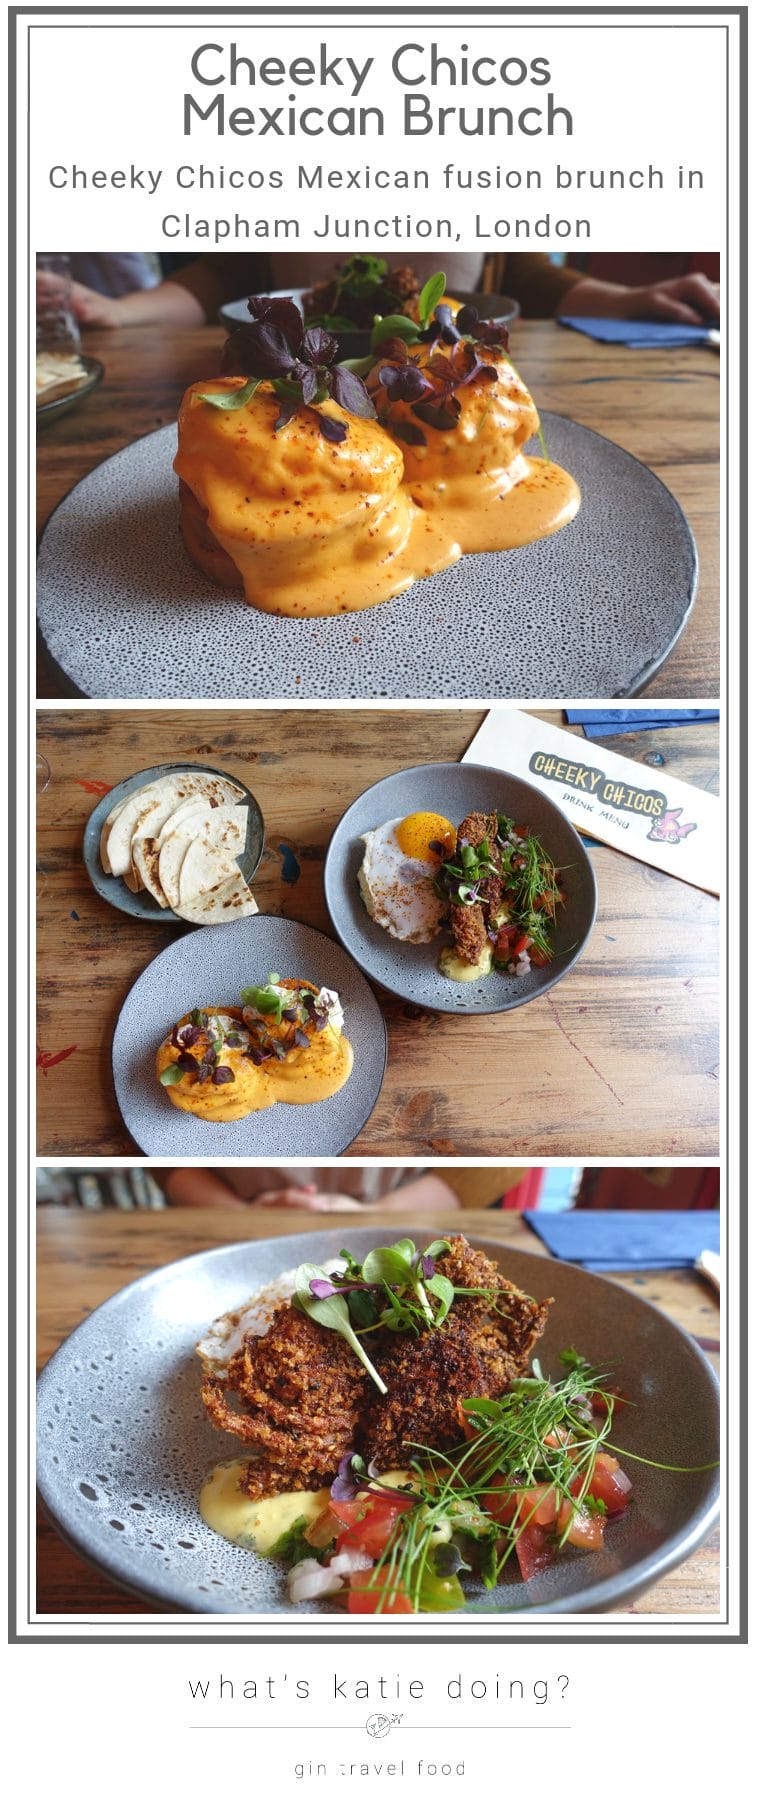 Cheeky Chicos Mexican brunch Clapham Junction London